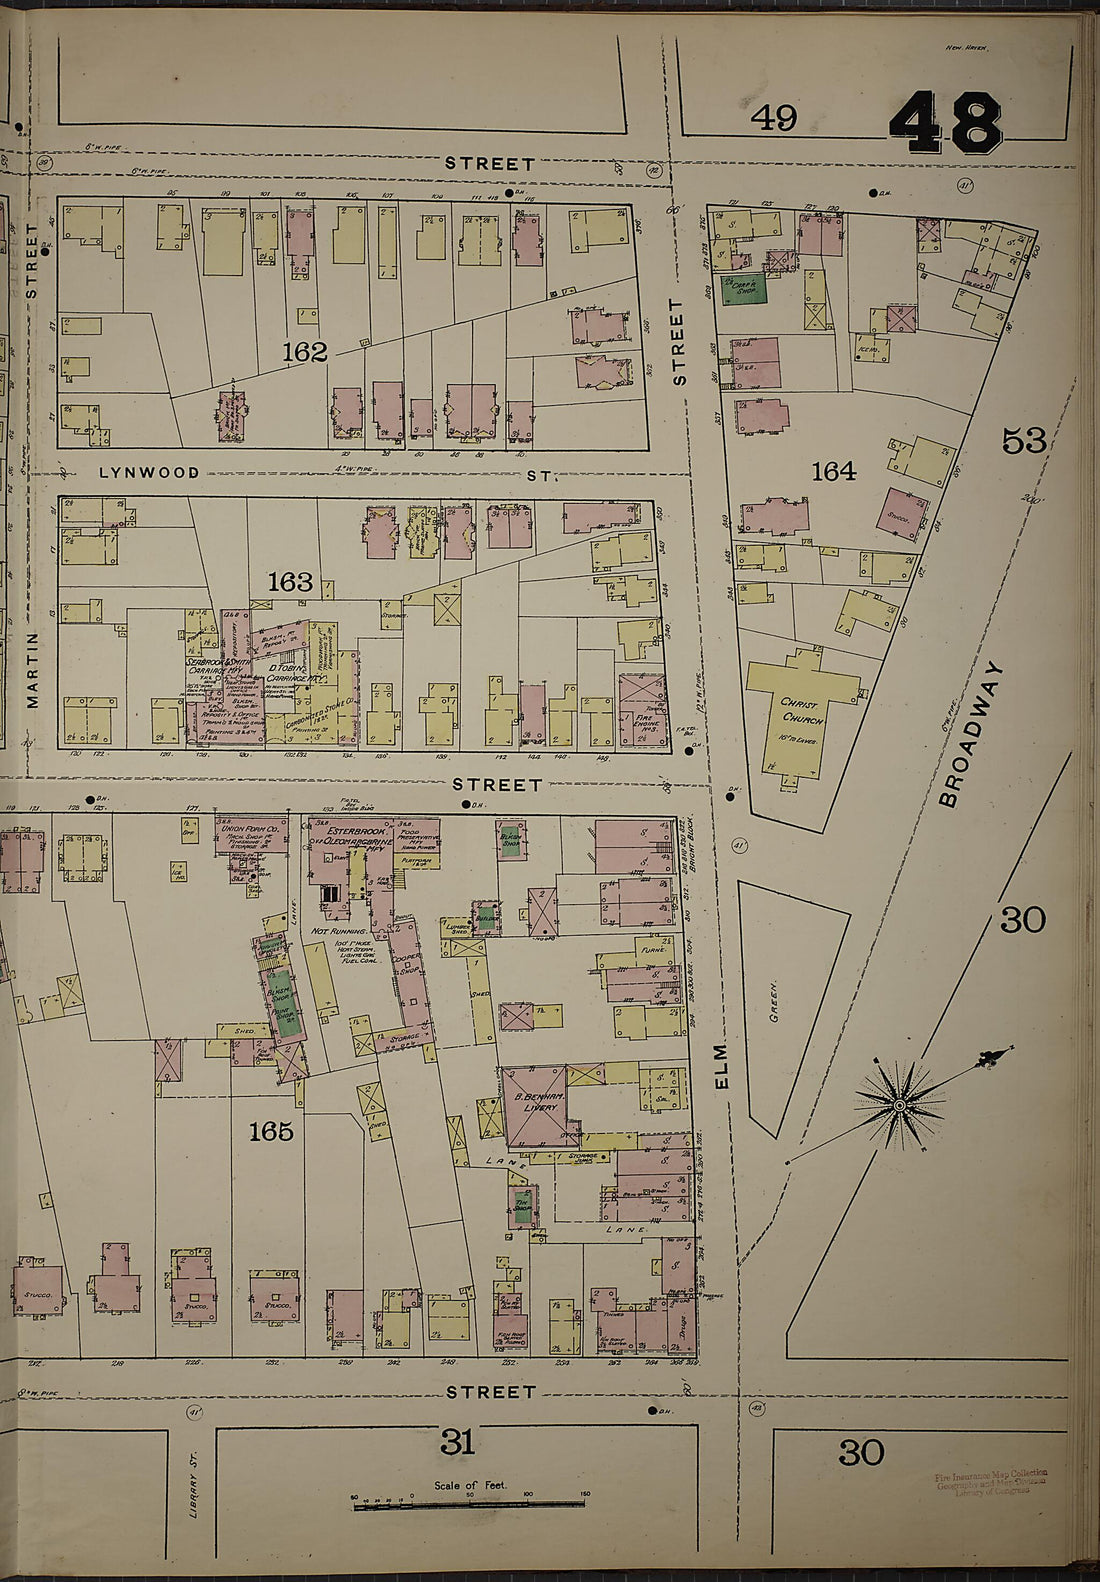 This old map of New Haven, New Haven County, Connecticut was created by Sanborn Map Company in 1886